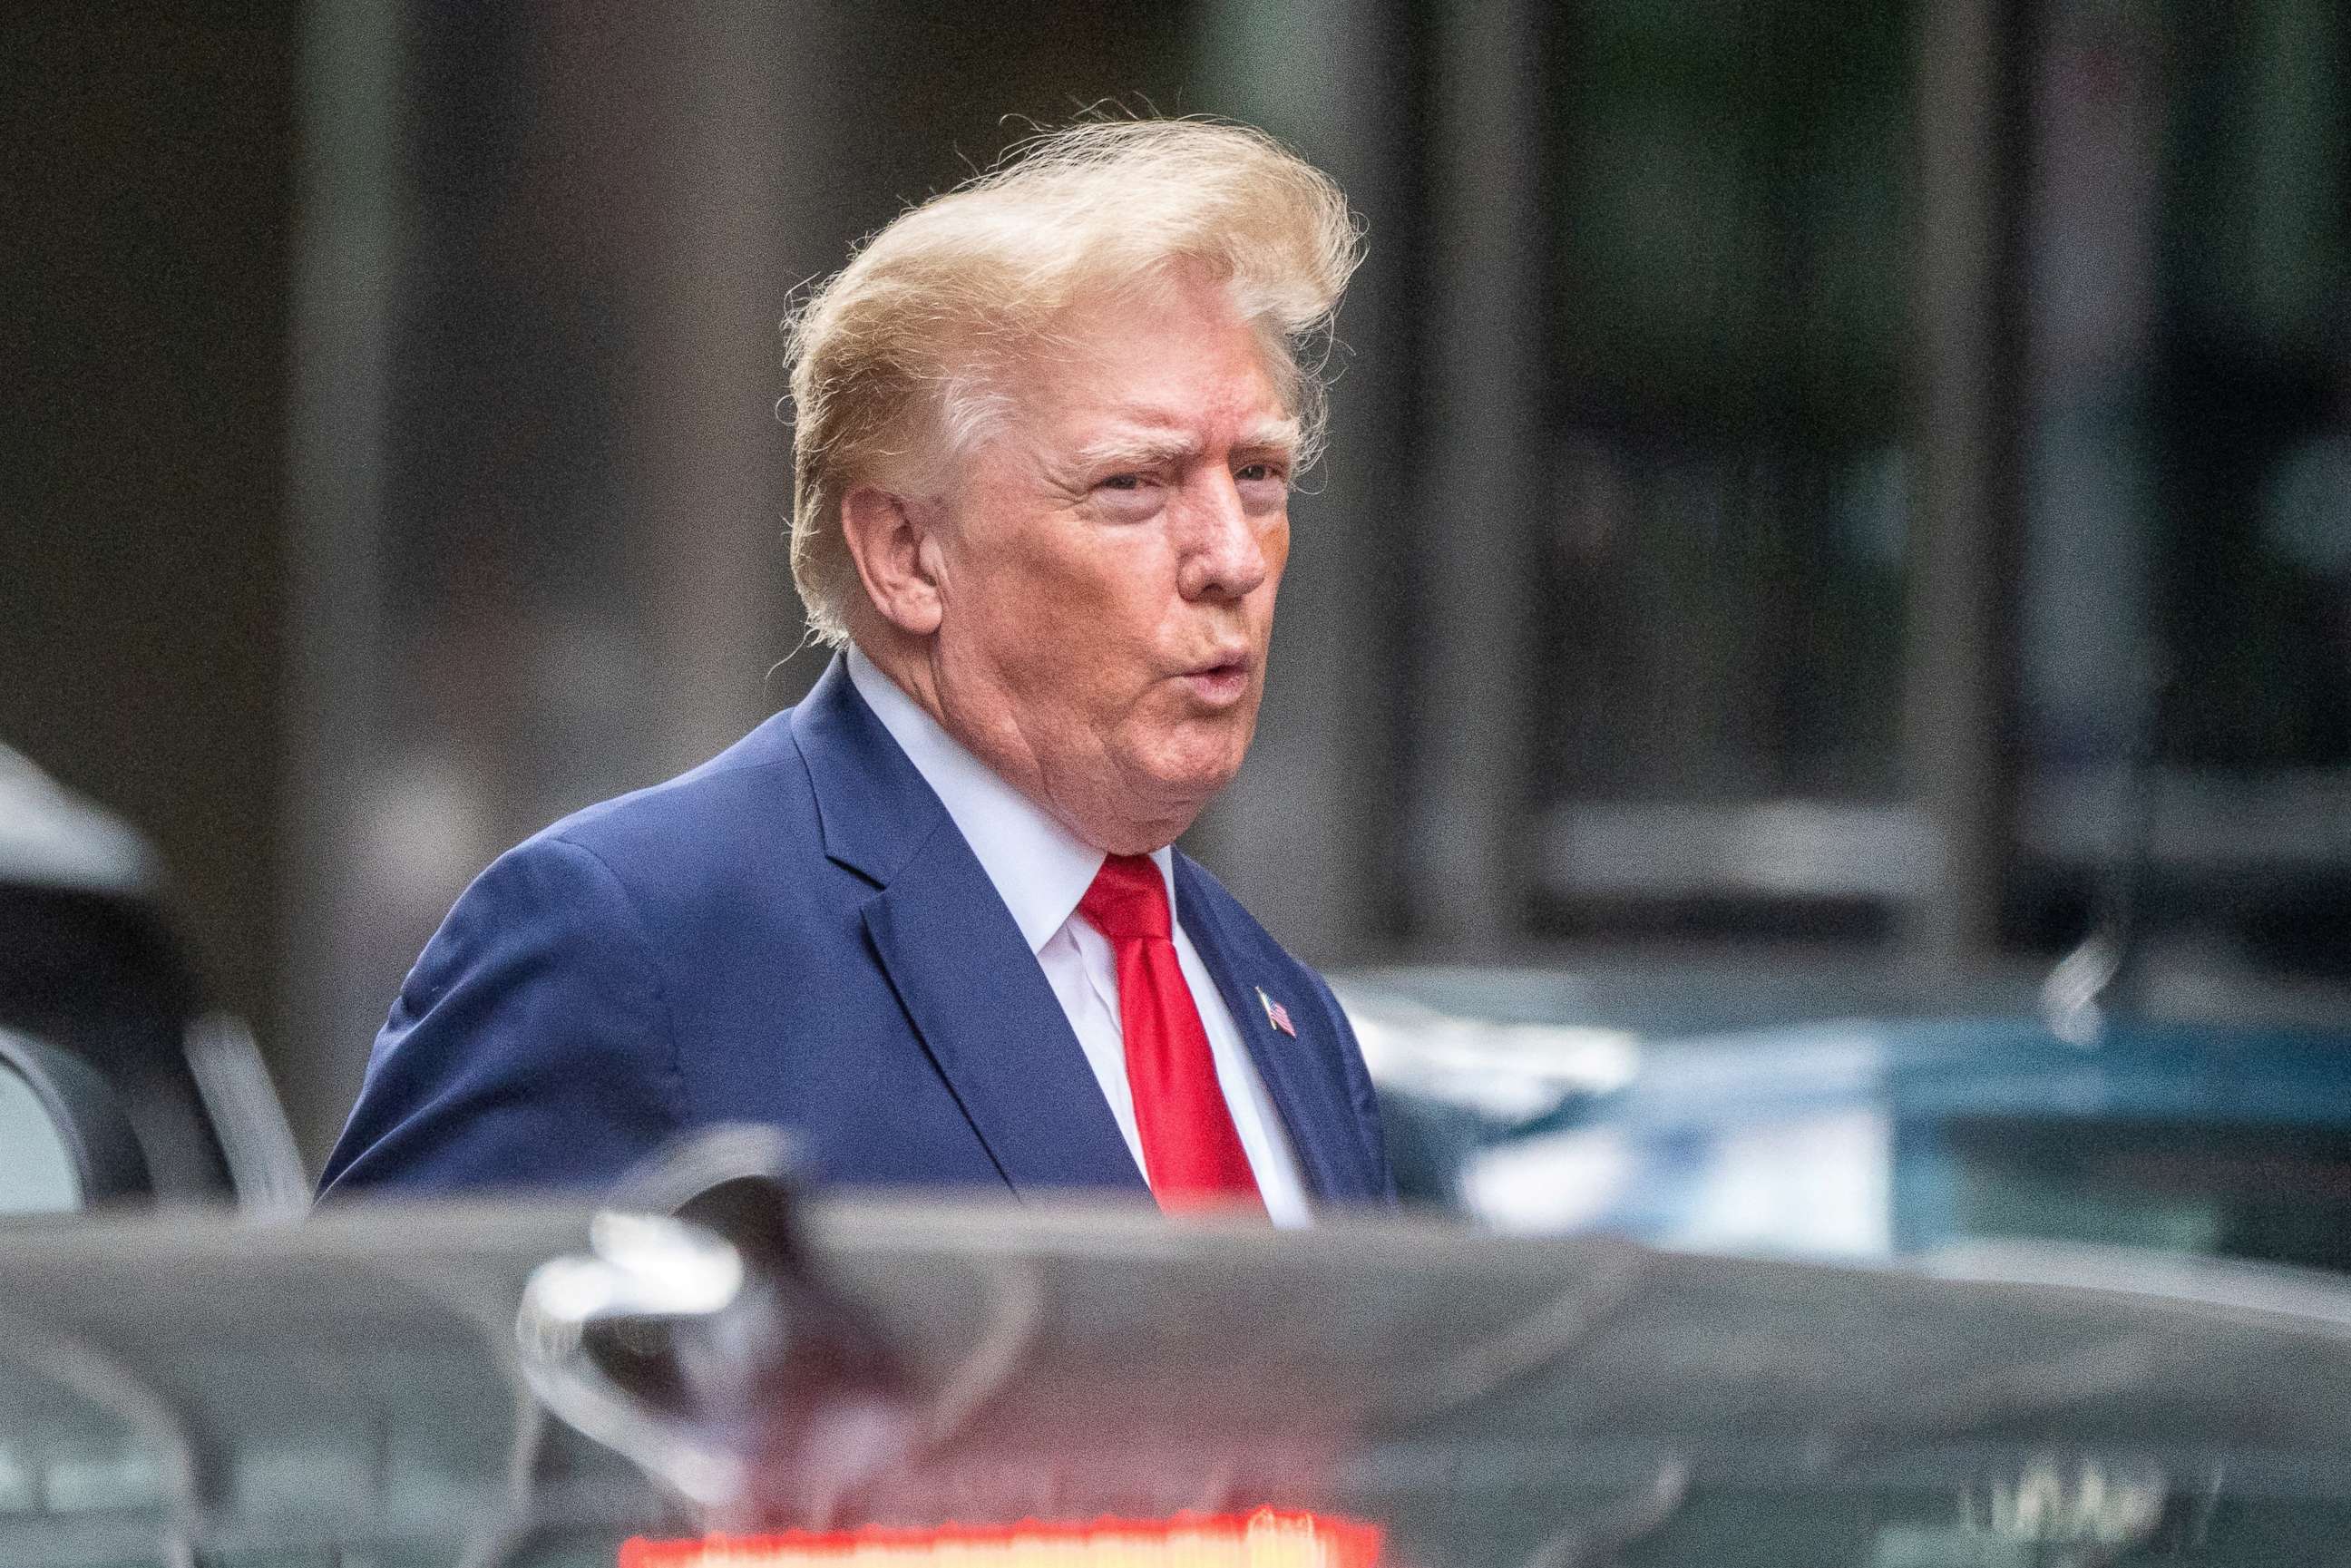 FILE PHOTO: Former U.S. President Donald Trump departs Trump Tower in New York City, Aug. 10, 2022, two days after FBI agents searched his Mar-a-Lago estate in Palm Beach, Fla.